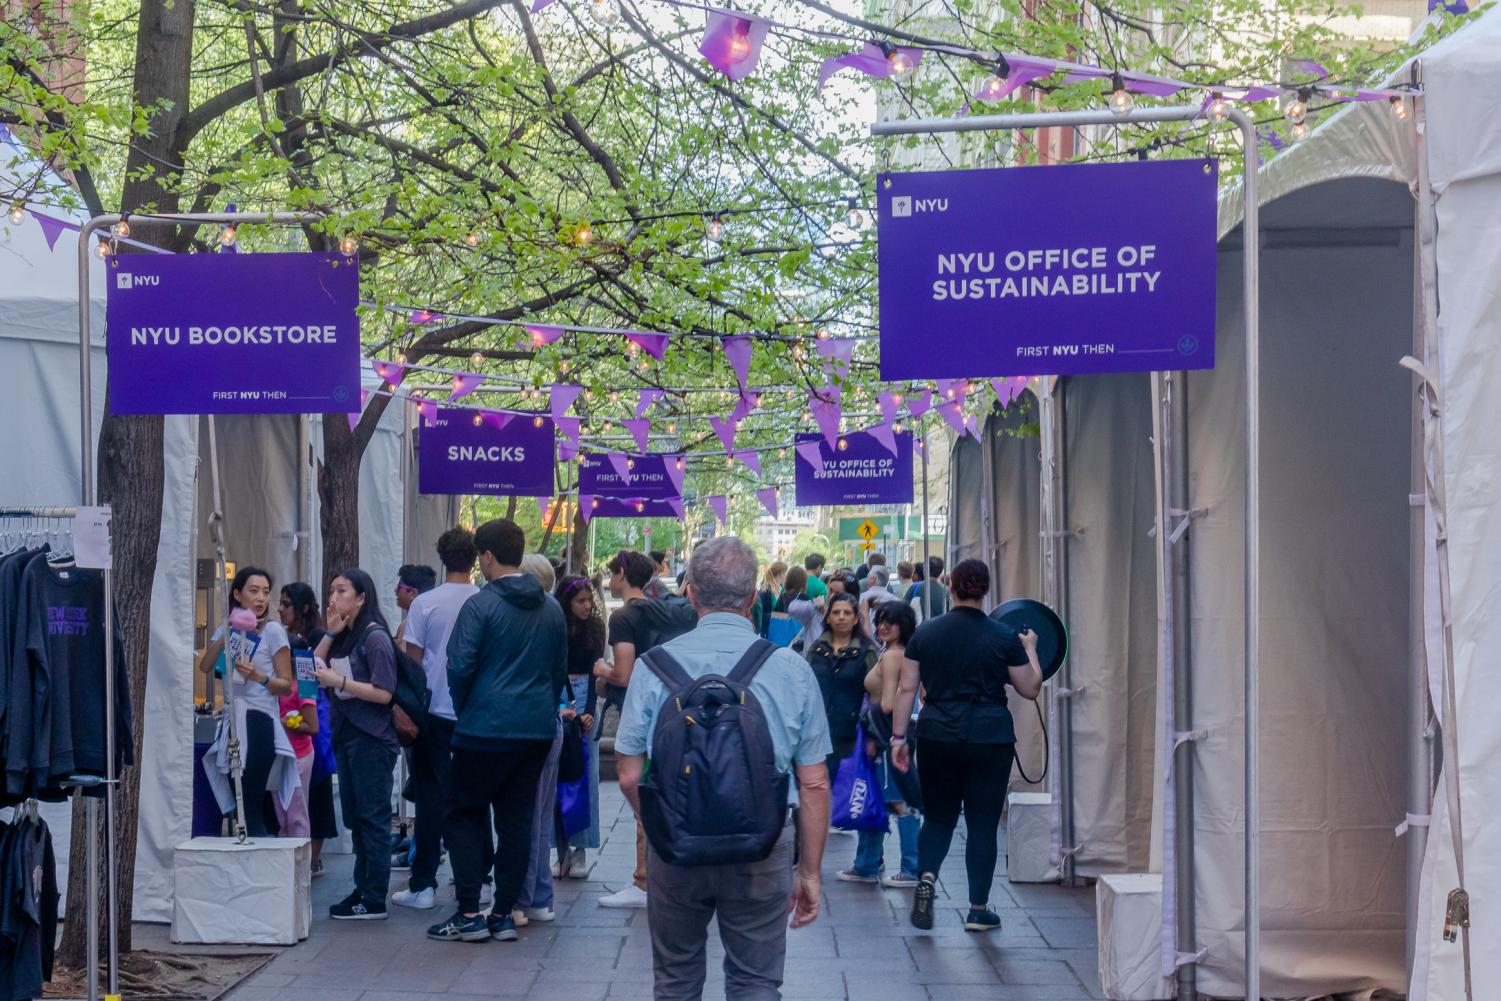 Prospective students walk through pop-up stands set up by the NYU Bookstore and Office of Sustainability.